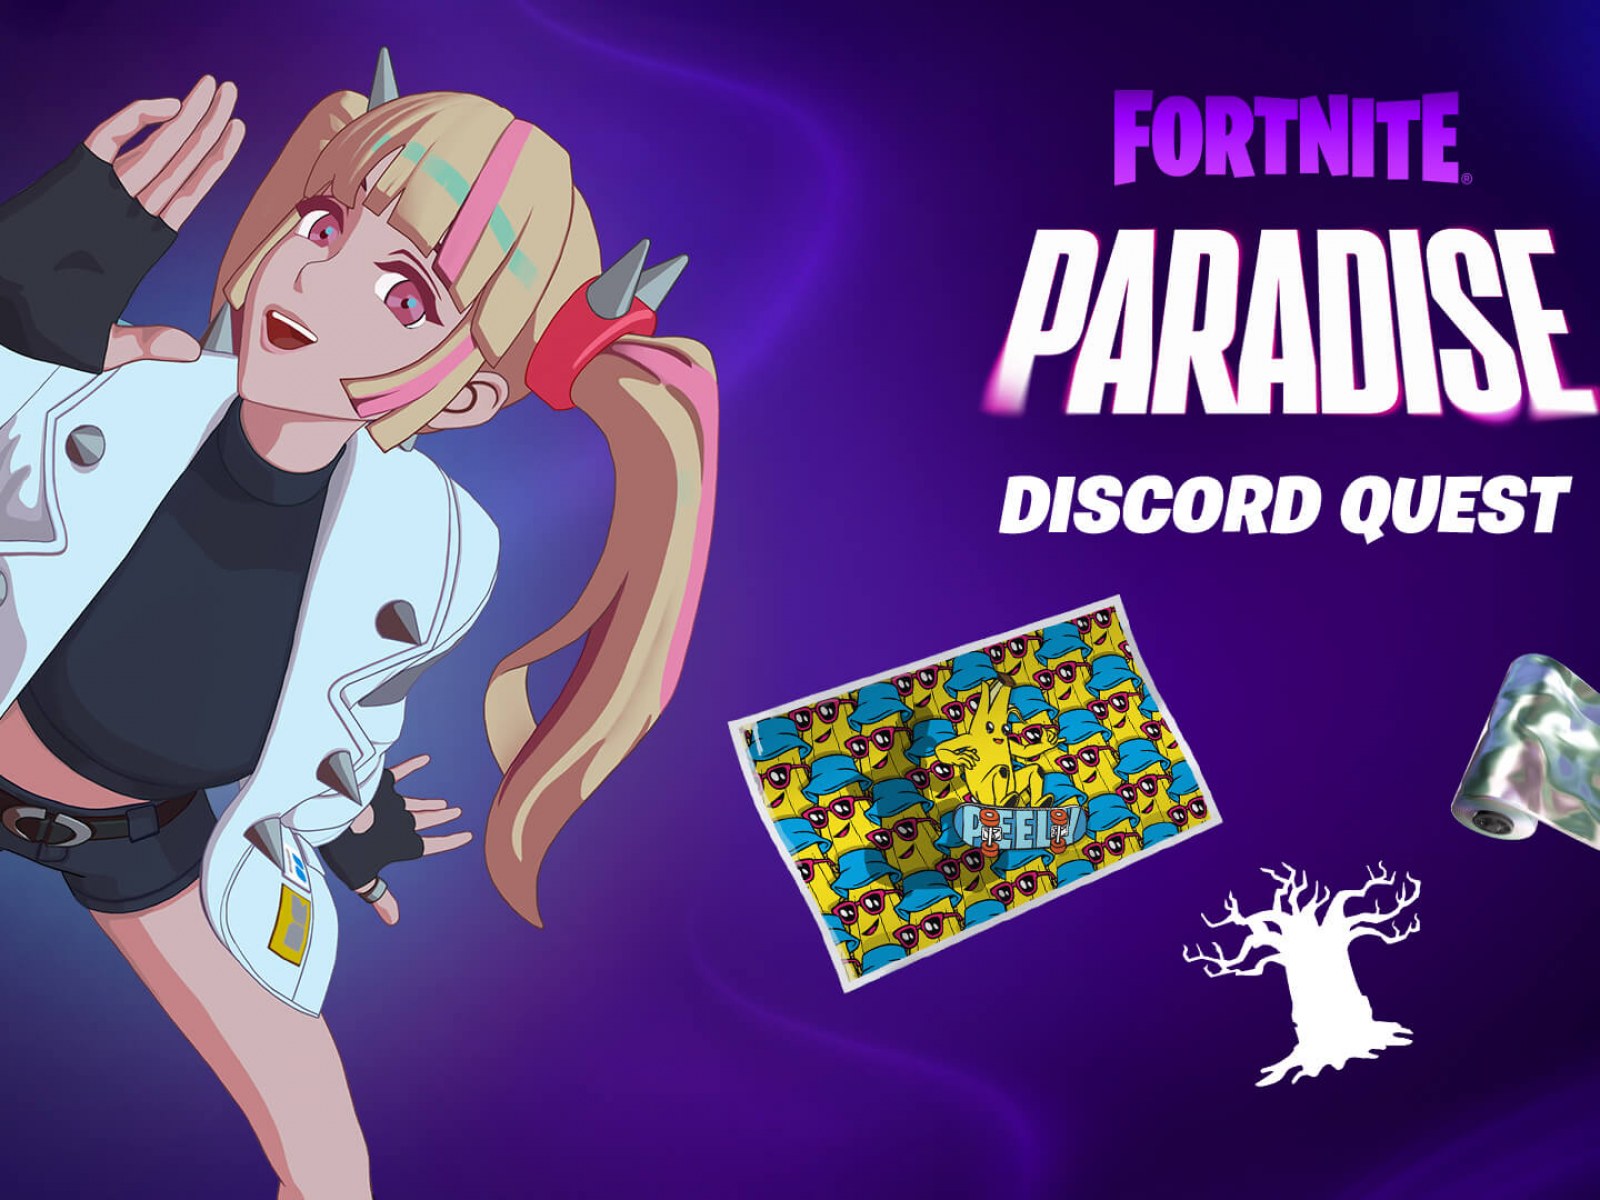 Fortnite Paradise Discord Quest: Complete Challenges And Earn Free Rewards